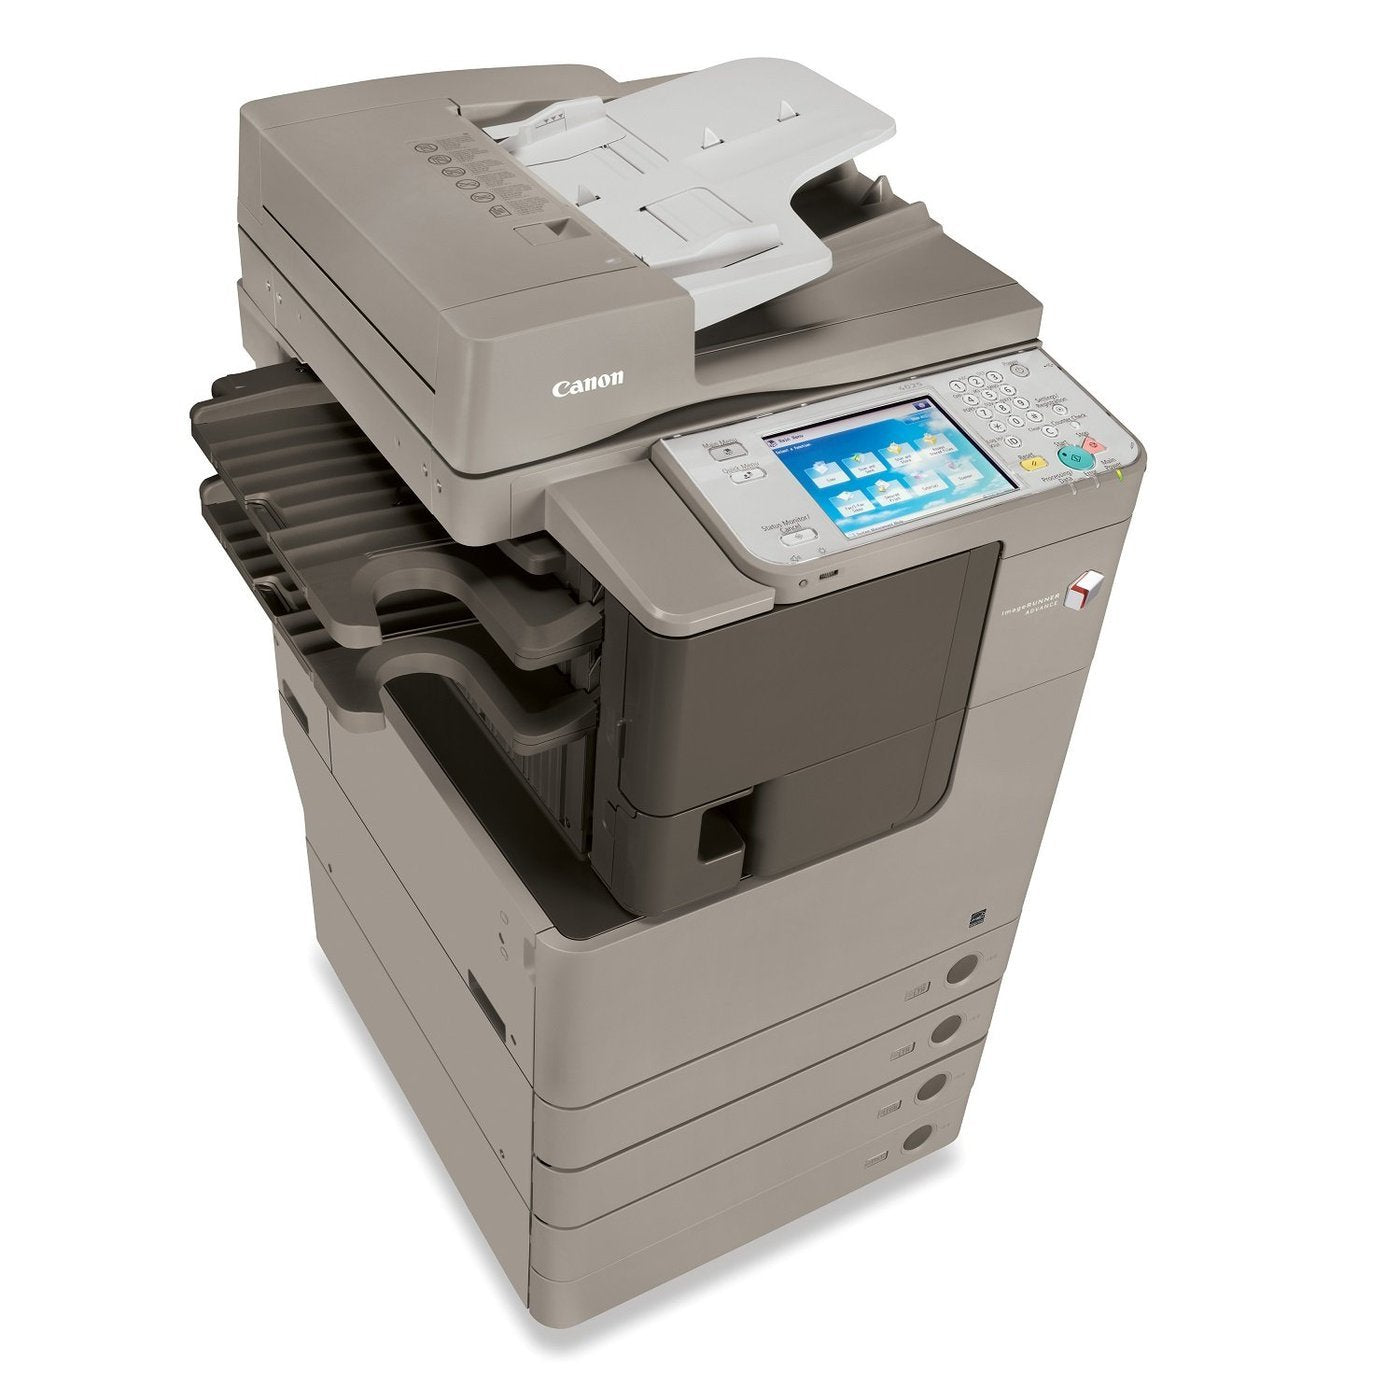 Absolute Toner Canon imageRUNNER ADVANCE 4045 (IRA 4045) Monochrome Multifunction Laser Printer, Copier, Scanner With Finisher, Stapler, 4 Paper Cassettes, LCD, 11x17 Showroom Monochrome Copiers